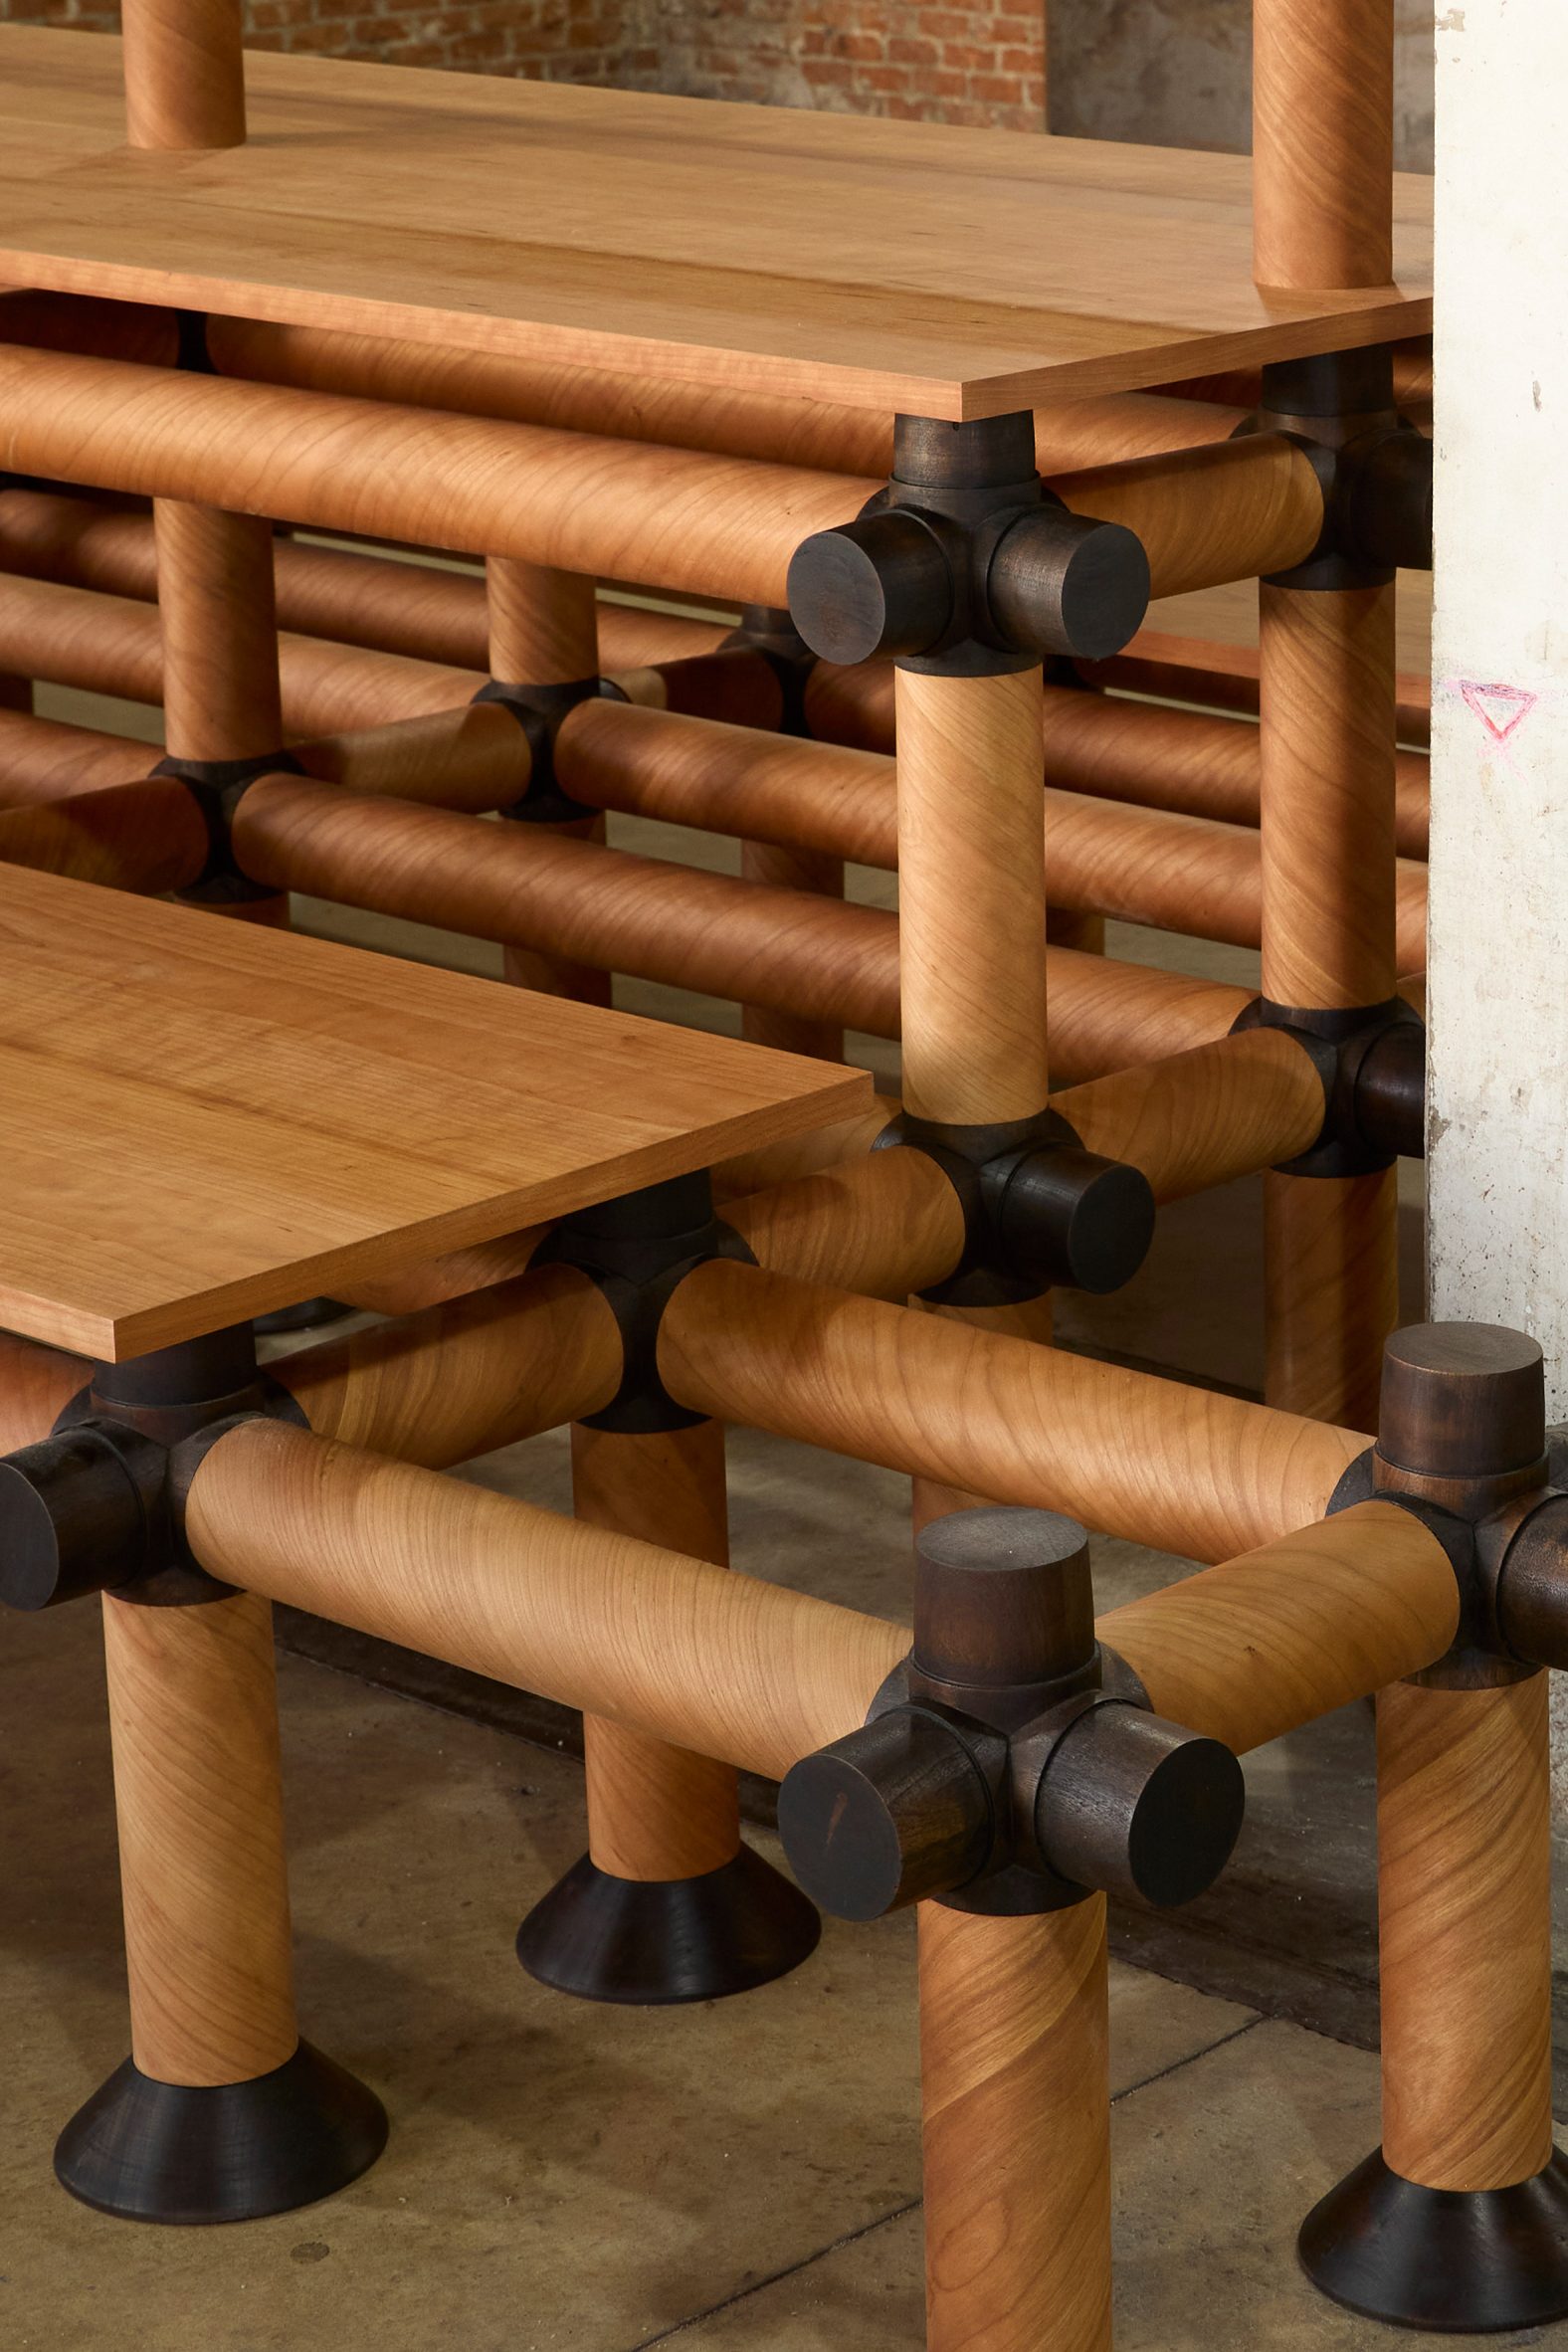 Close up image of furniture made from wood